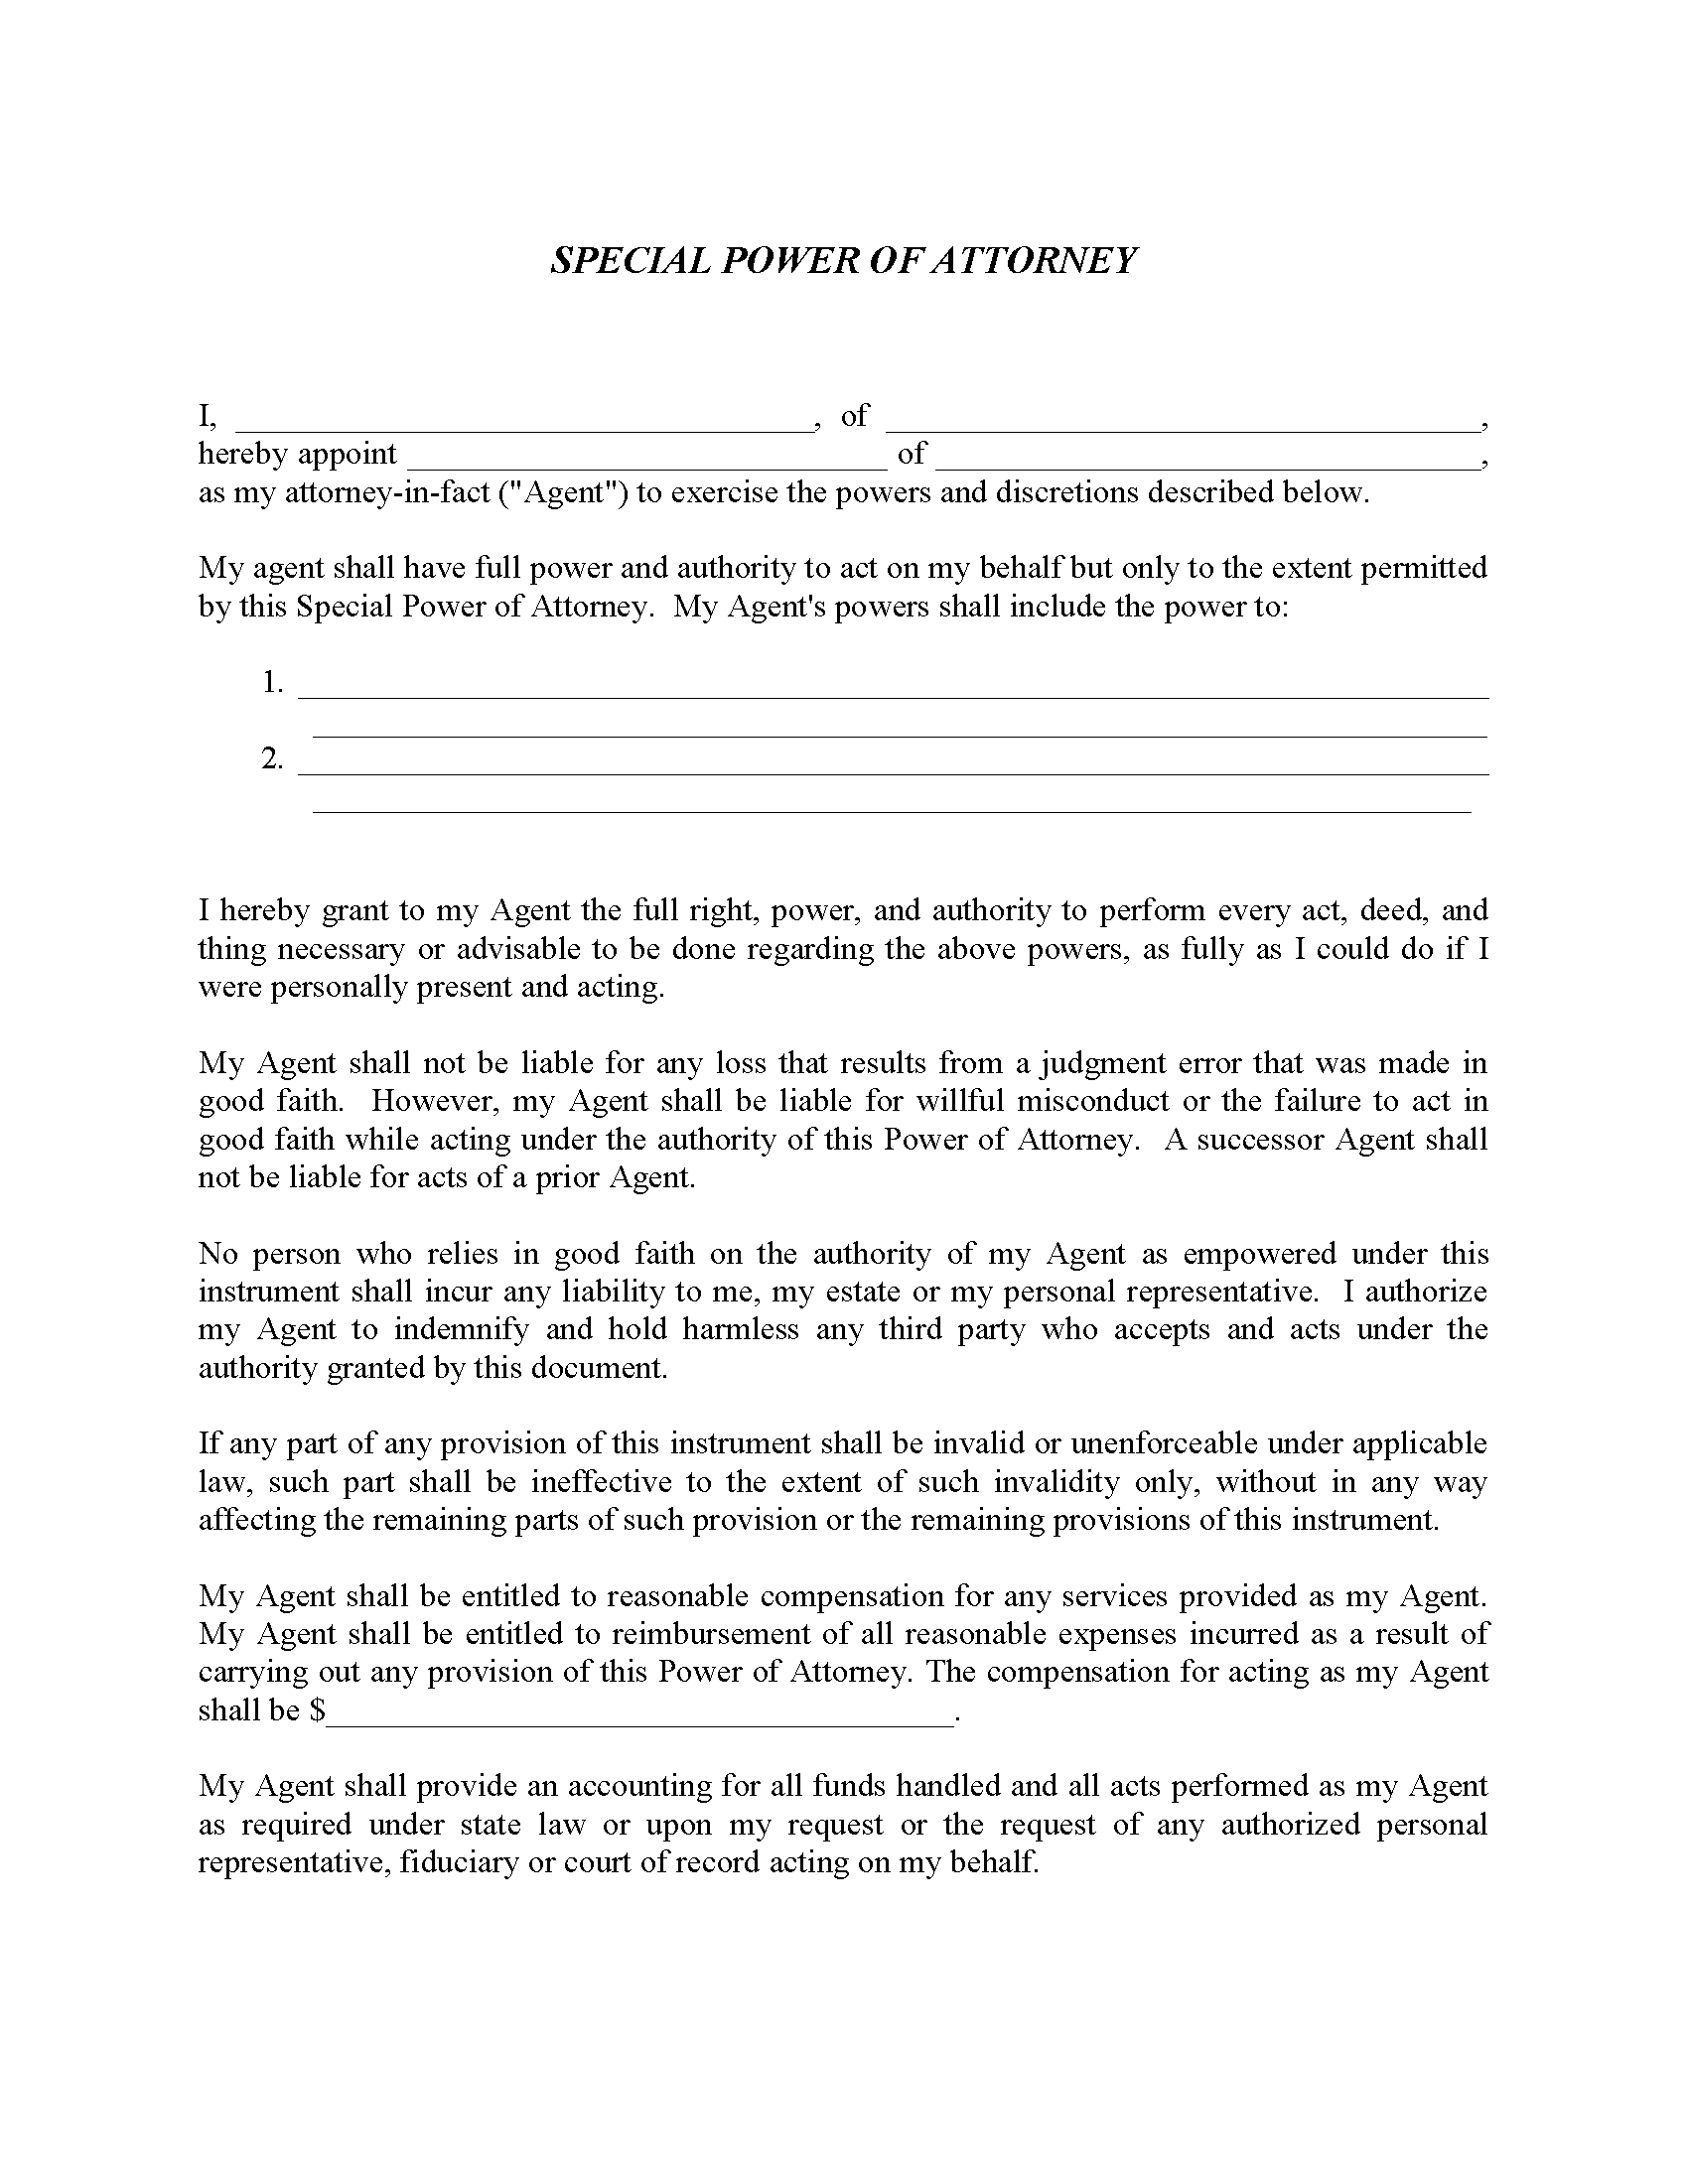 Limited Power of Attorney - Fillable PDF - Free Printable Legal Forms